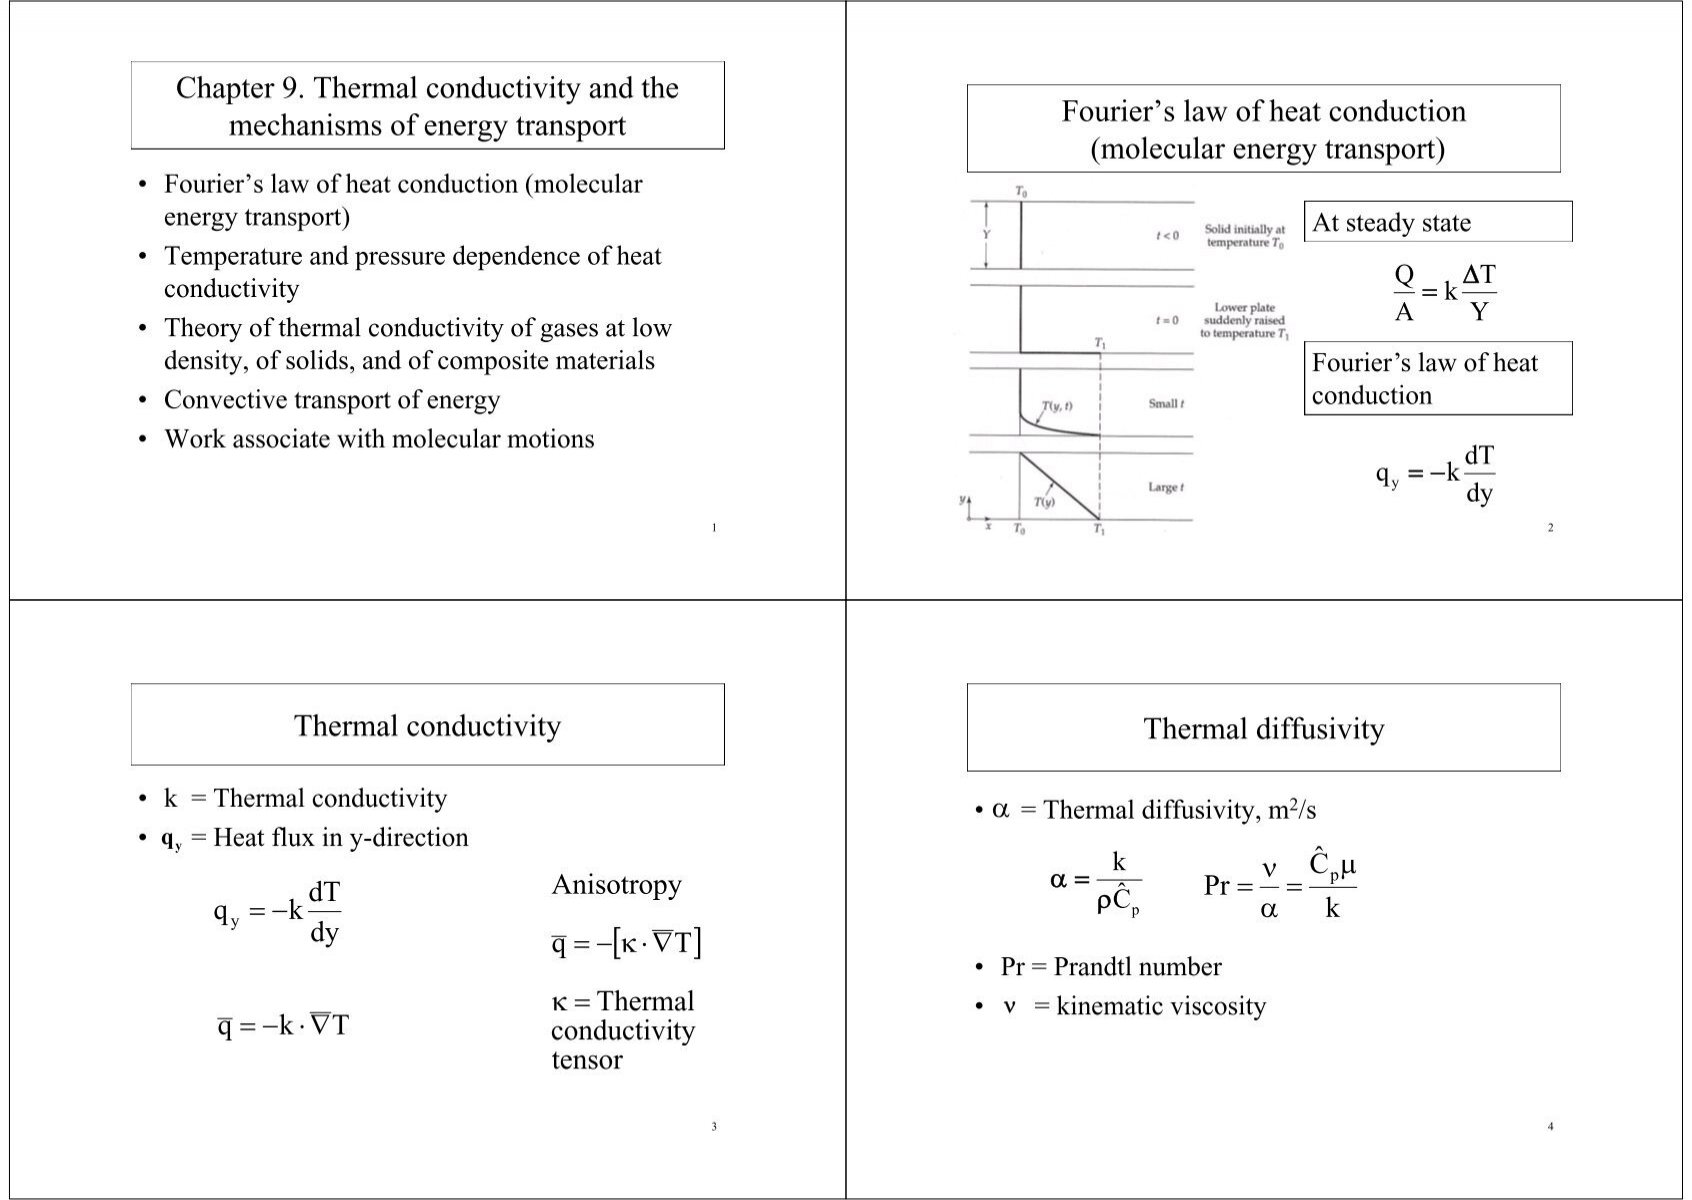 Chapter 9 Thermal Conductivity And The P Y Mechanisms Of Energy